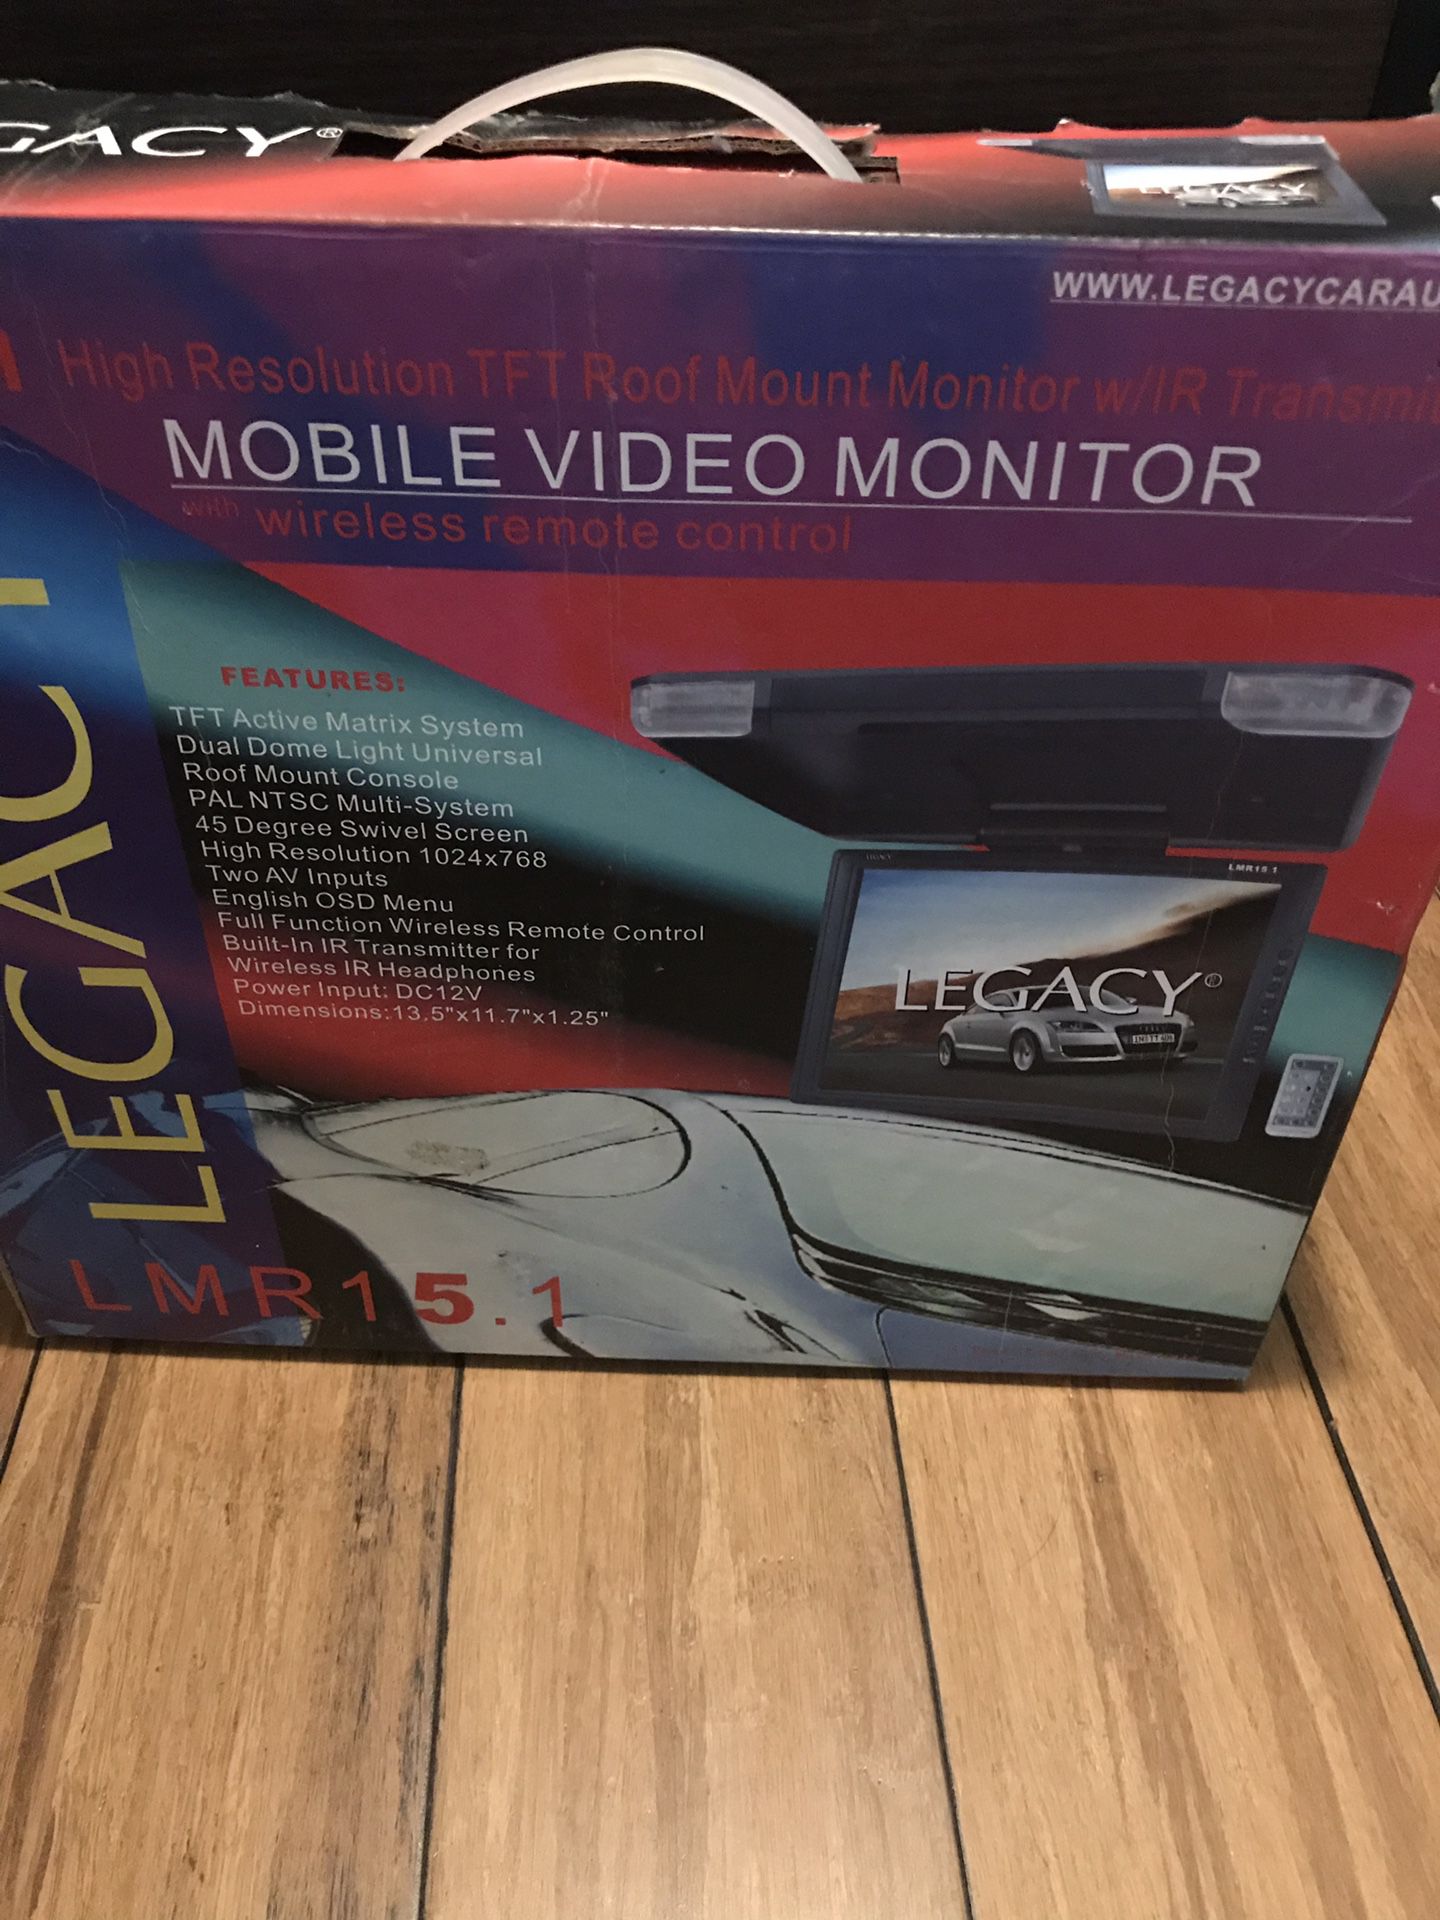 Mobile video monitor with wireless remote control